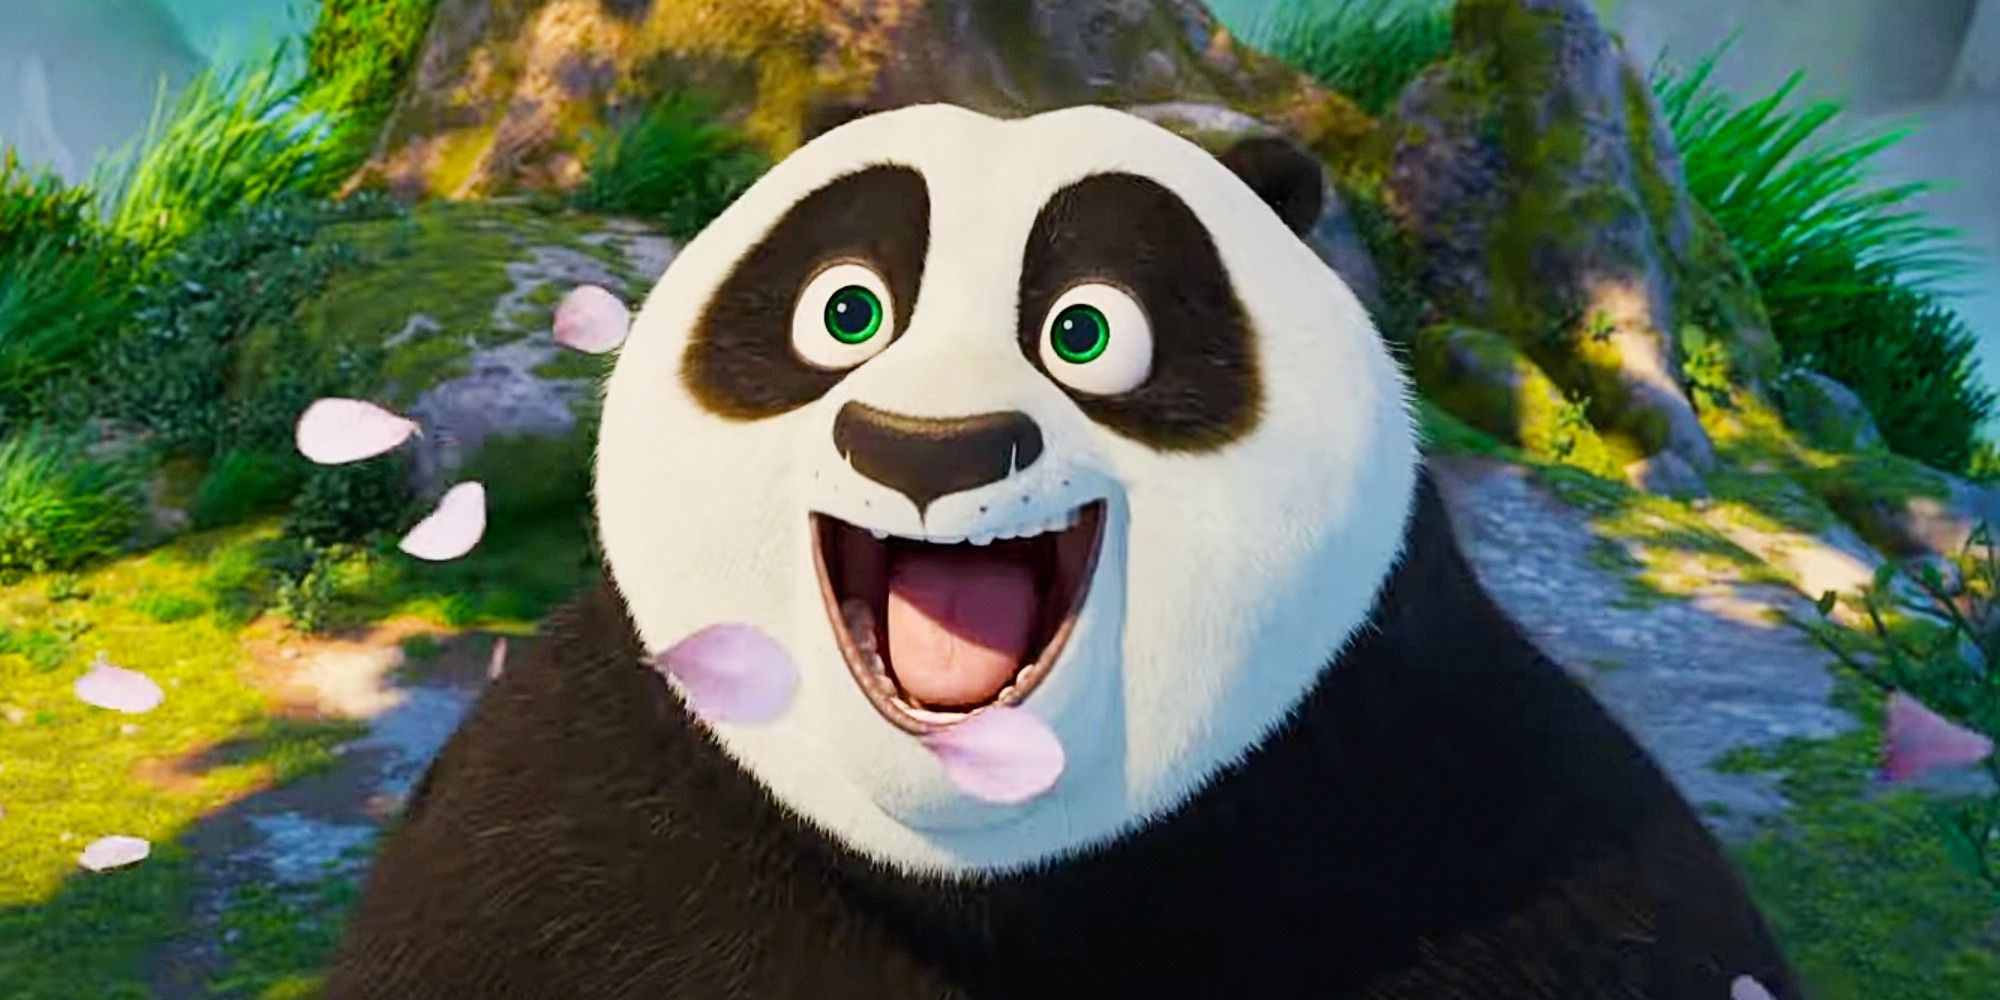 Po smiling widely with his mouth hanging open as flower petals drift on the wind around him in Kung Fu Panda 4